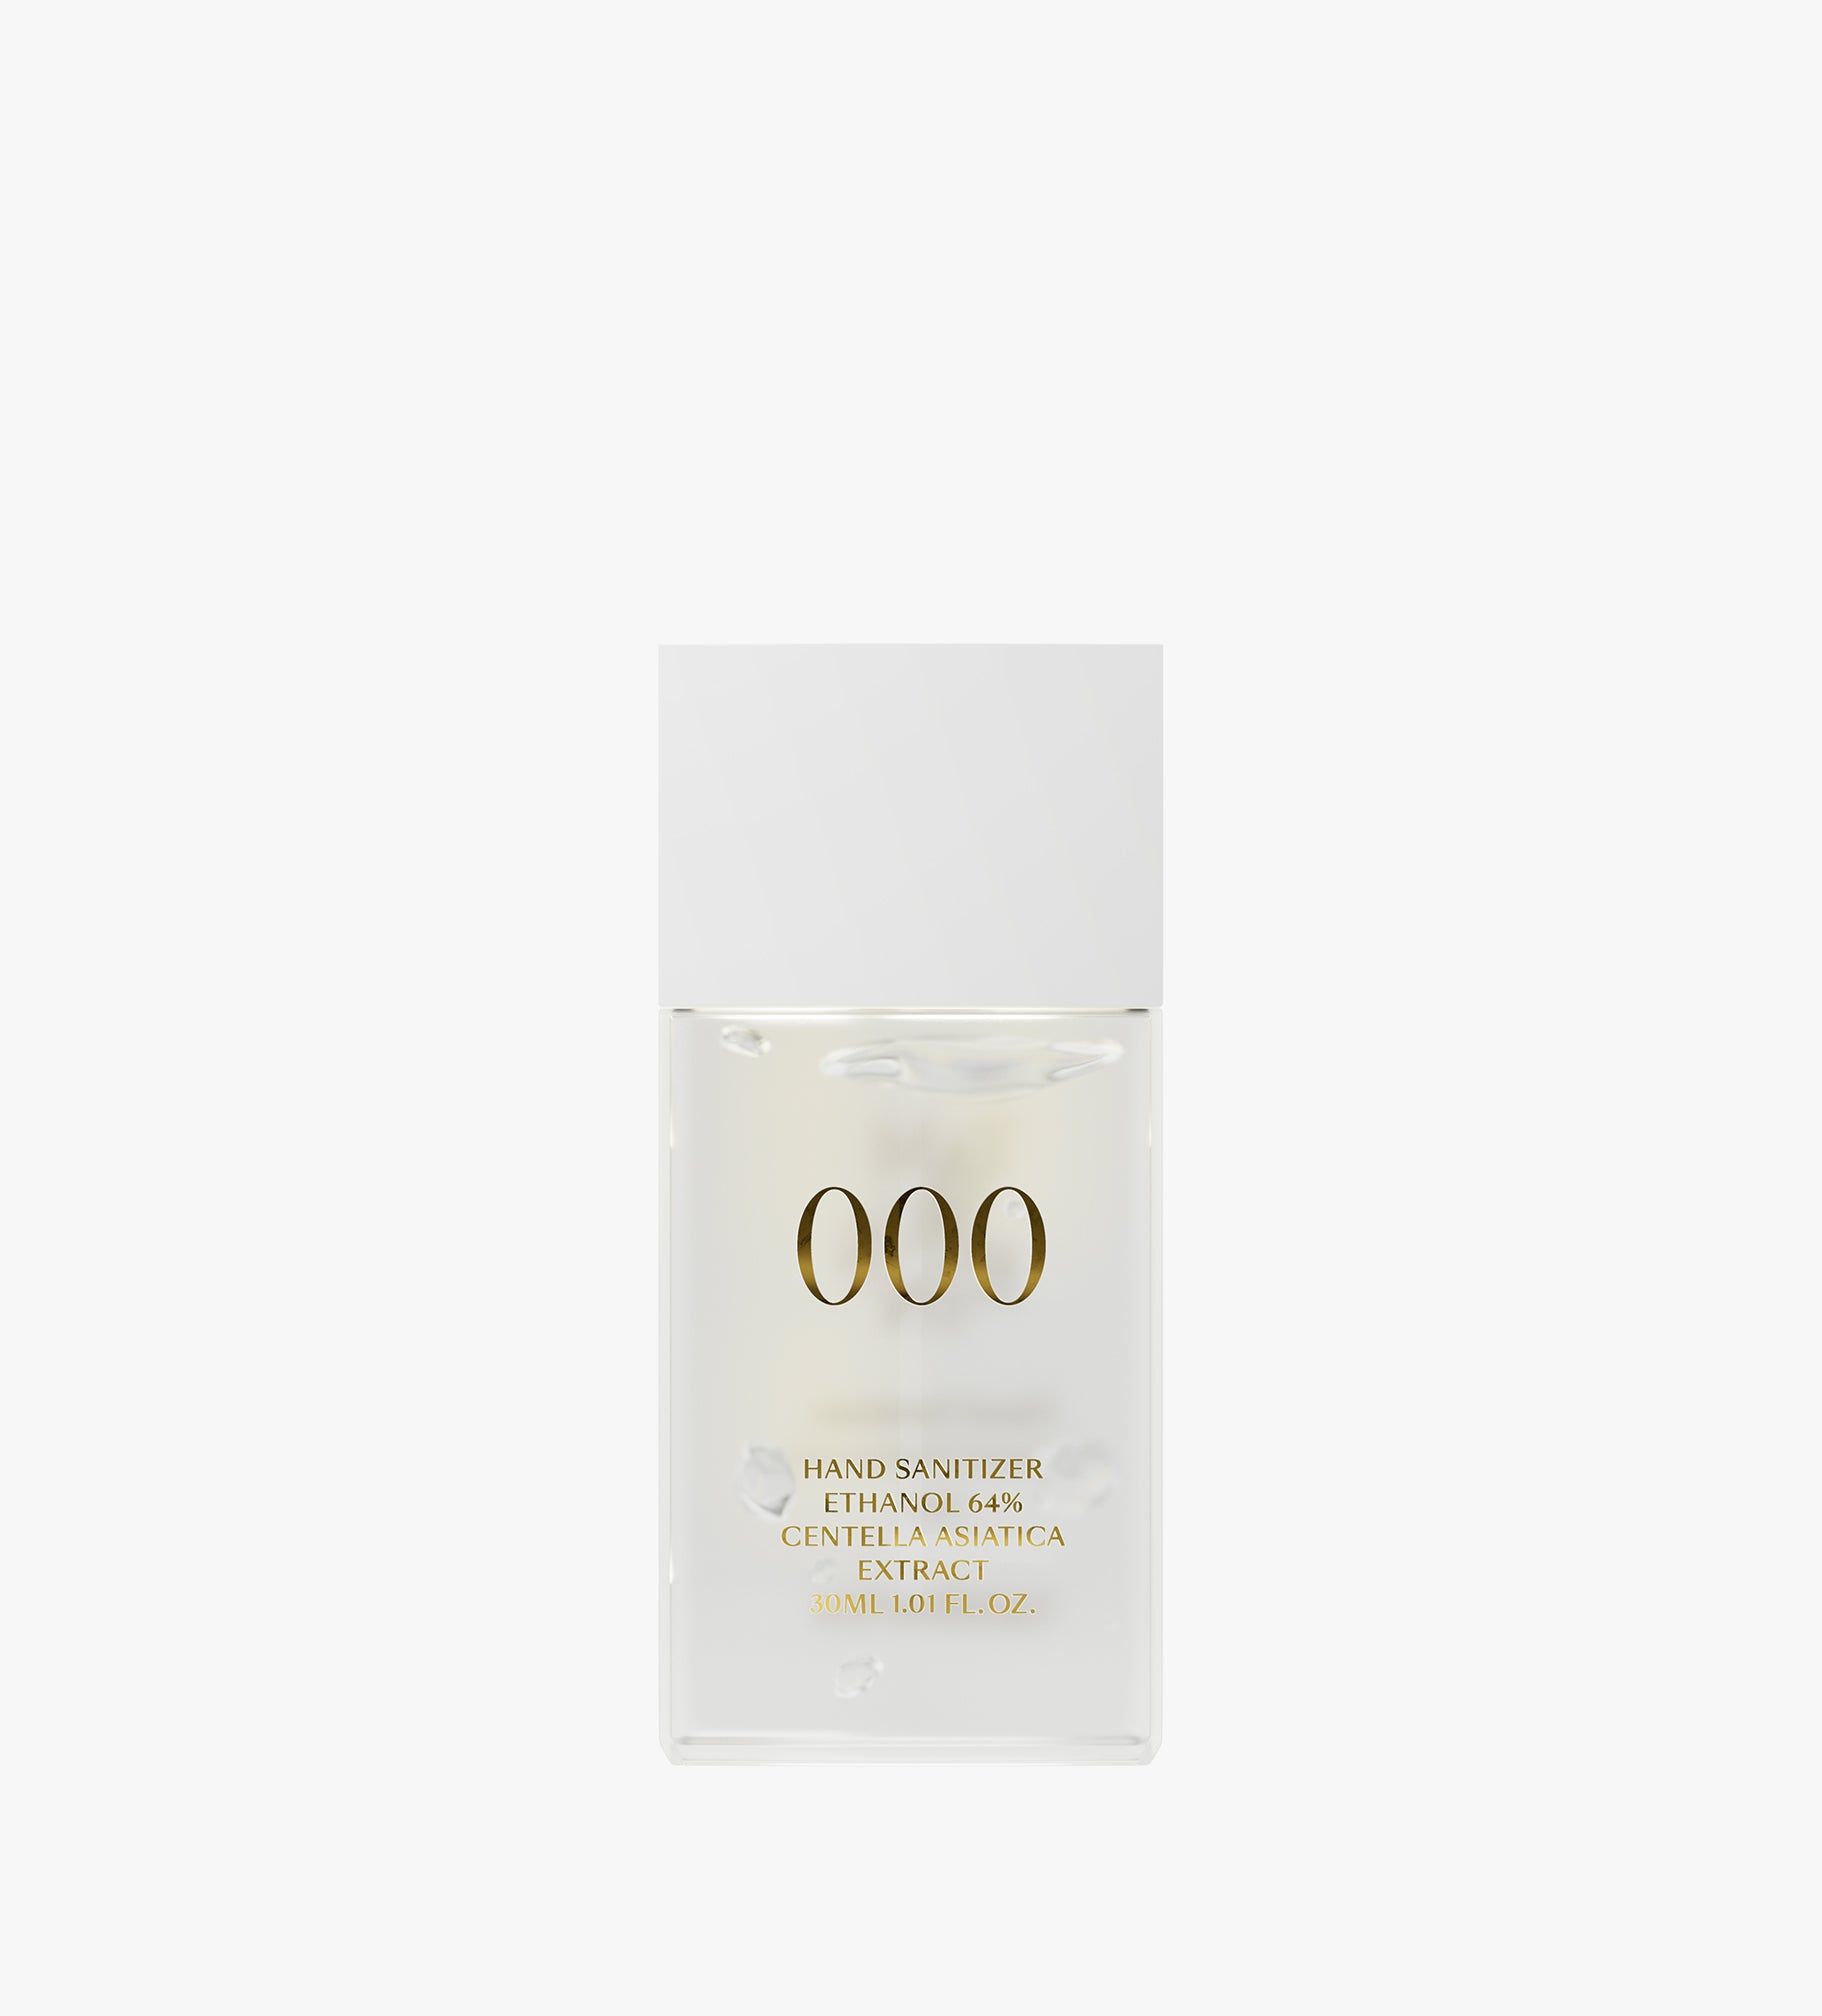 A 30ml bottle of TAMBURINS Hand Perfumed Sanitizer Gel #000 on a white surface.